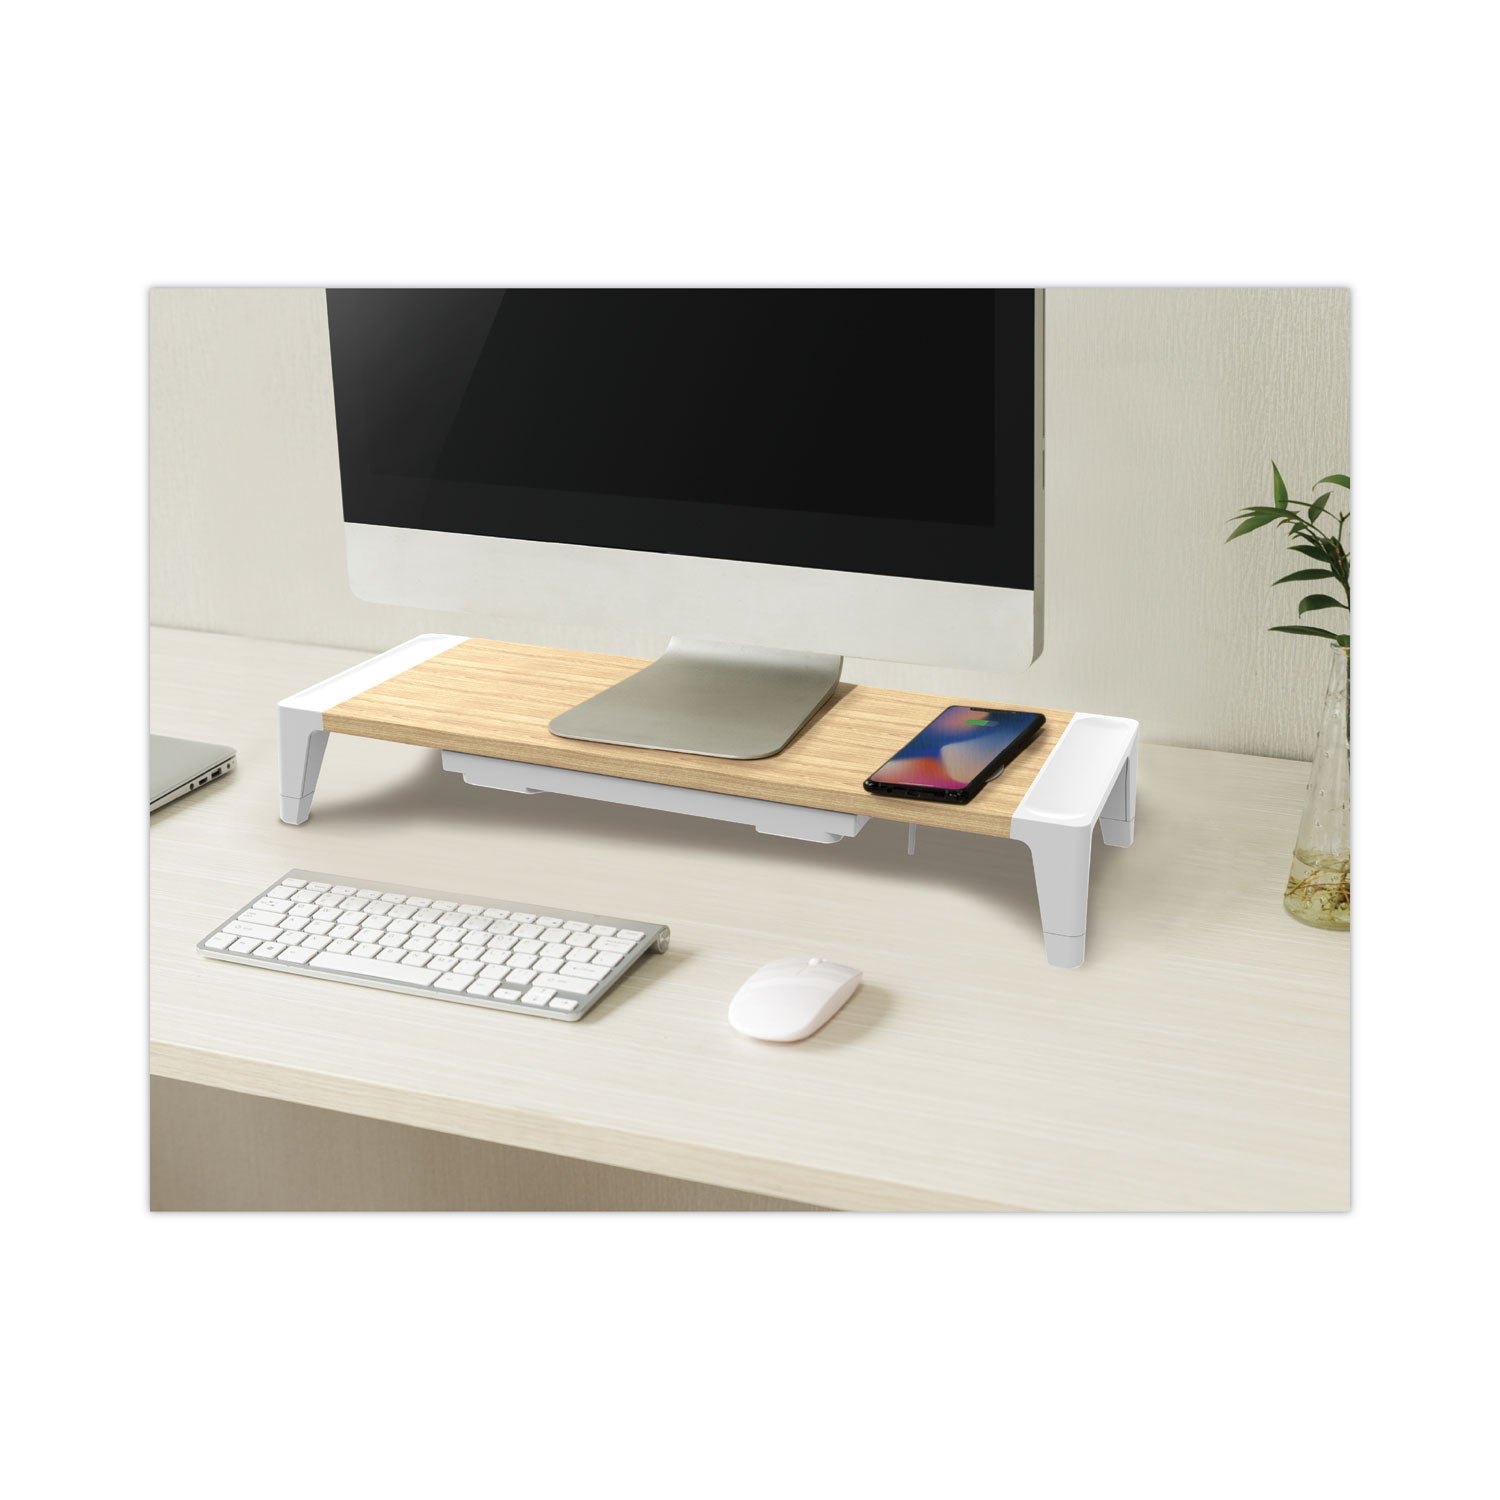 wooden-monitor-stand-with-wireless-charging-pad-98-x-2677-x-413-white_bosstnd2408wh - 4